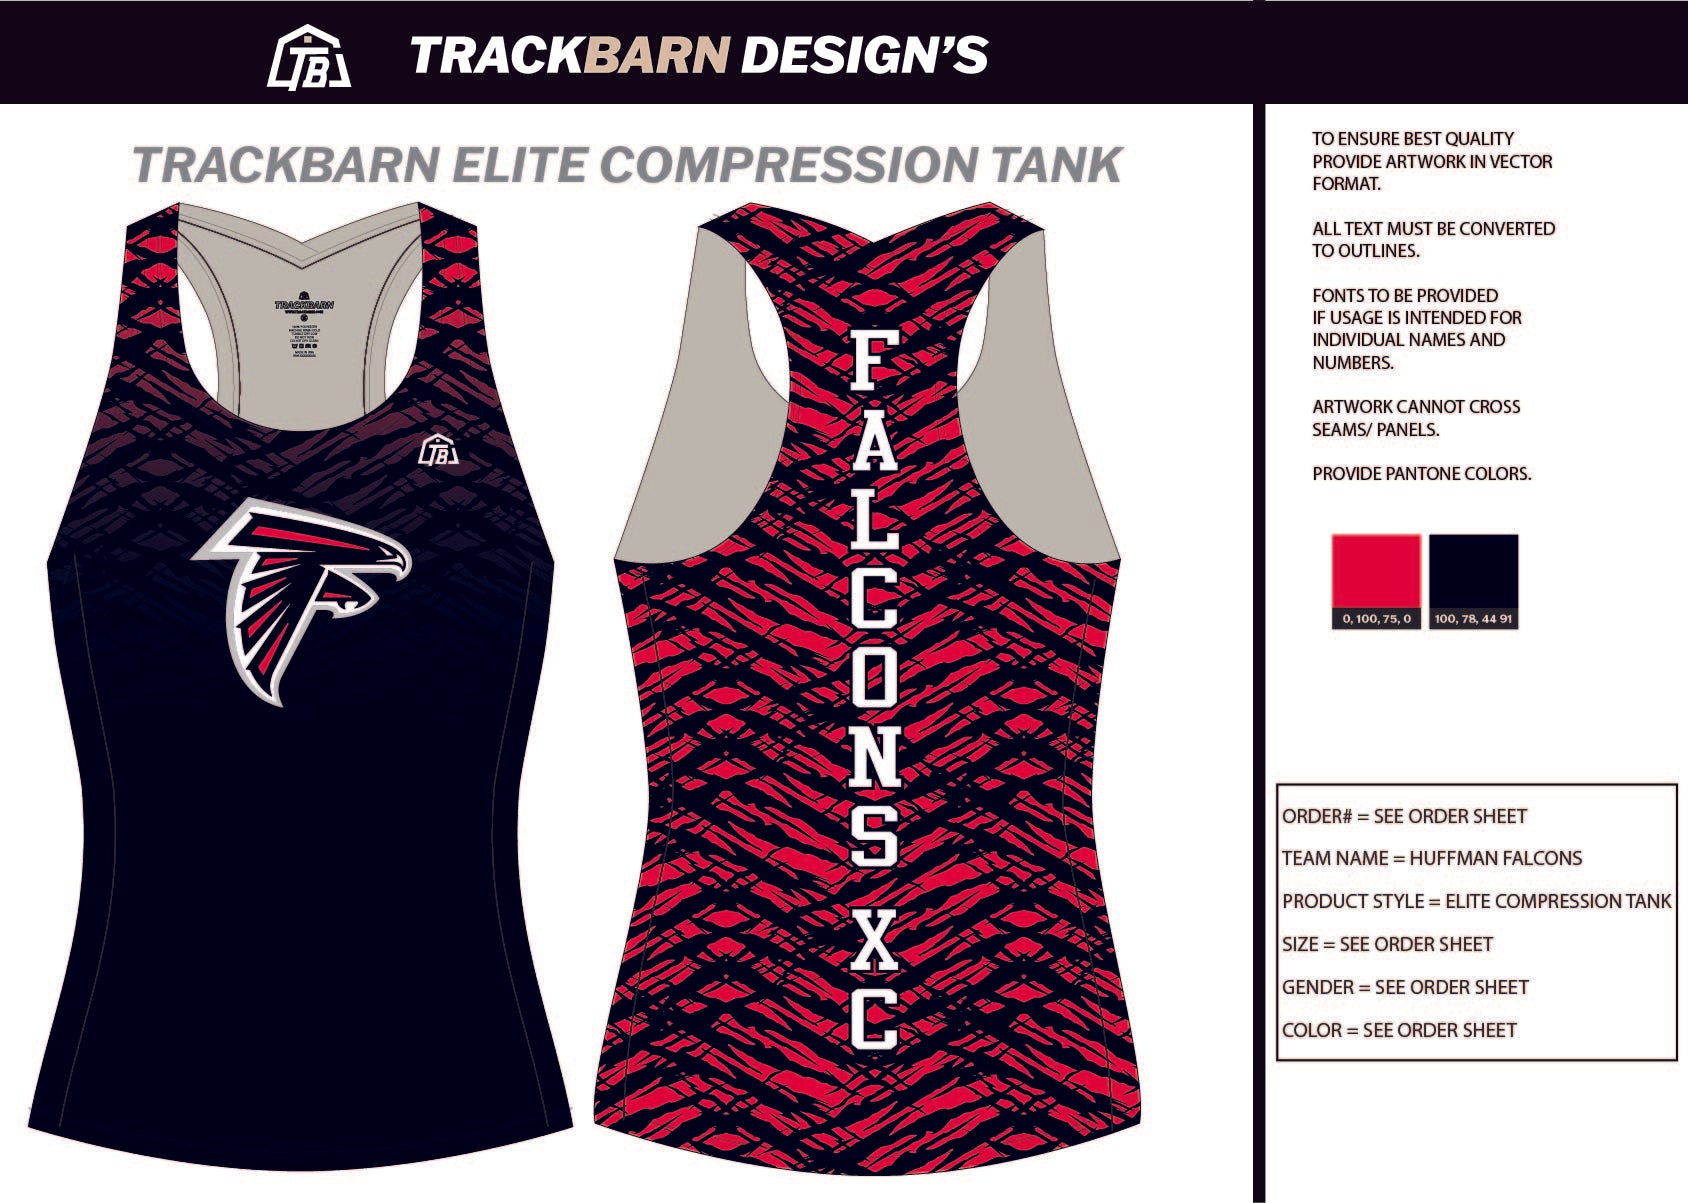 Huffman-Falcons- Womens Compression Tank